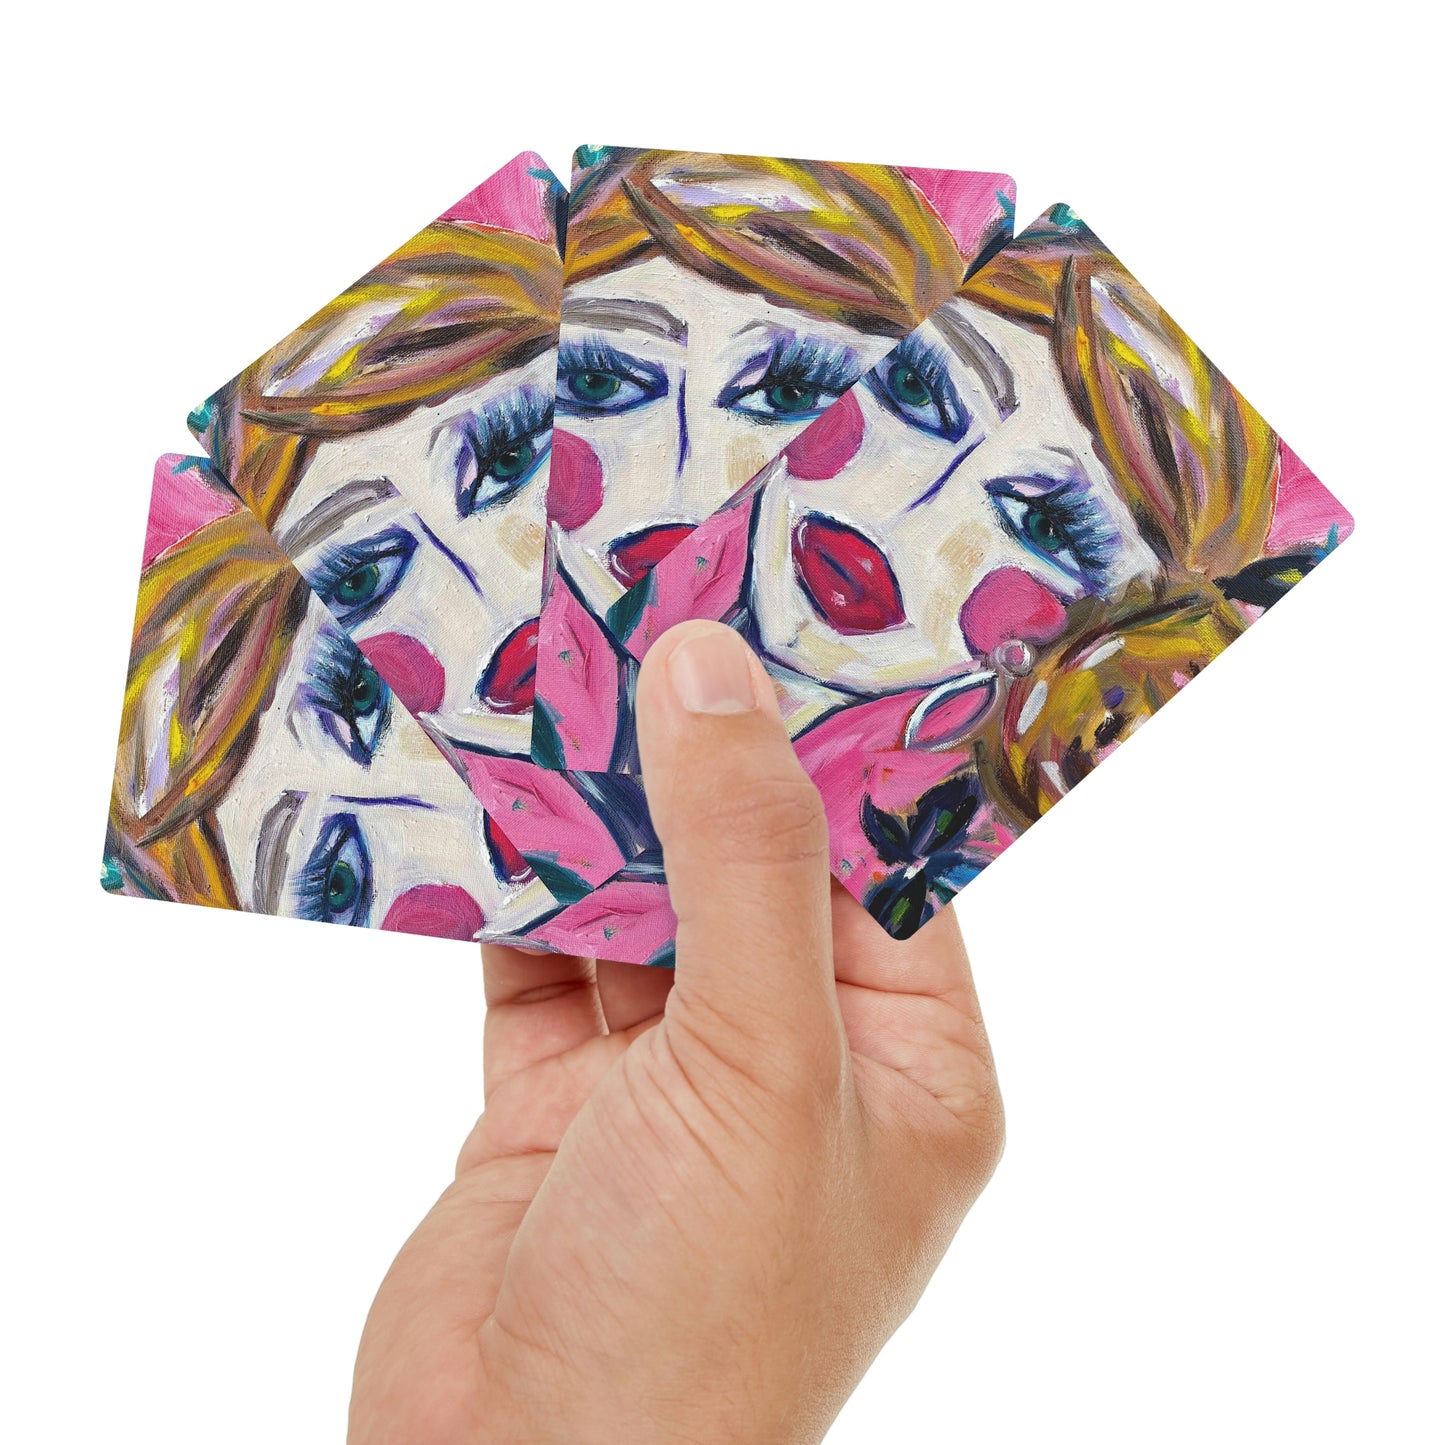 Lady with Irises Poker Cards/Playing Cards